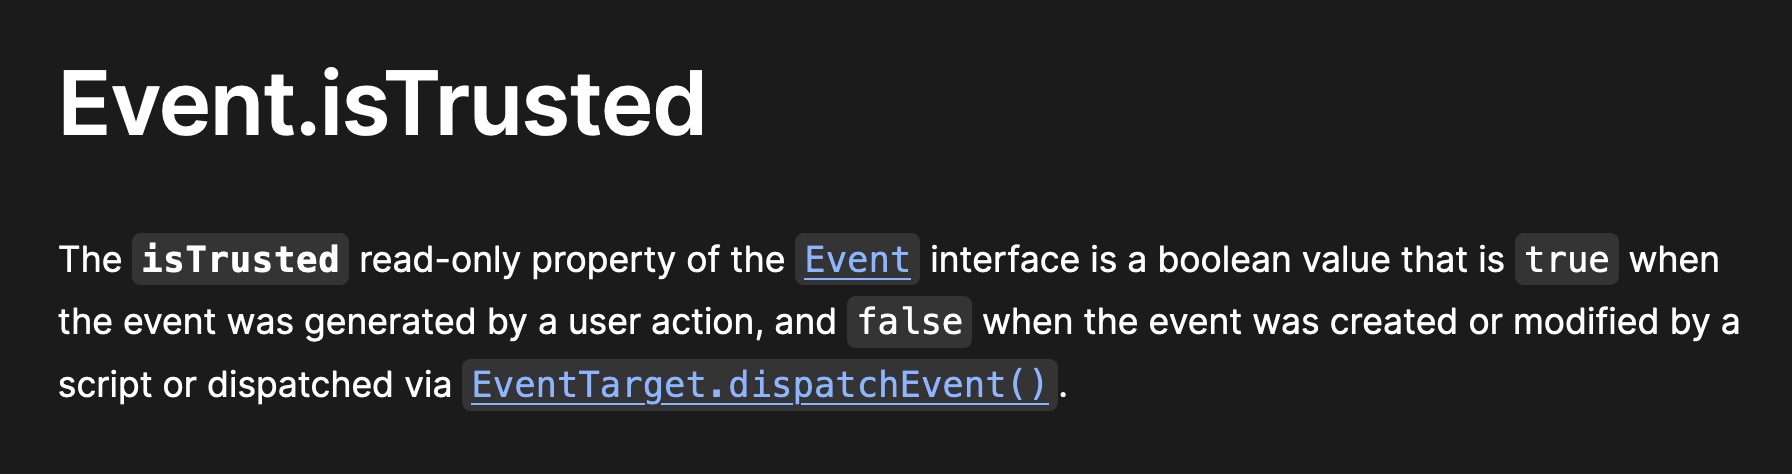 Event.isTrusted — The isTrusted read-only property of the Event interface is a boolean value that is true when the event was generated by a user action, and false when the event was created or modified by a script or dispatched via EventTarget.dispatchEvent().